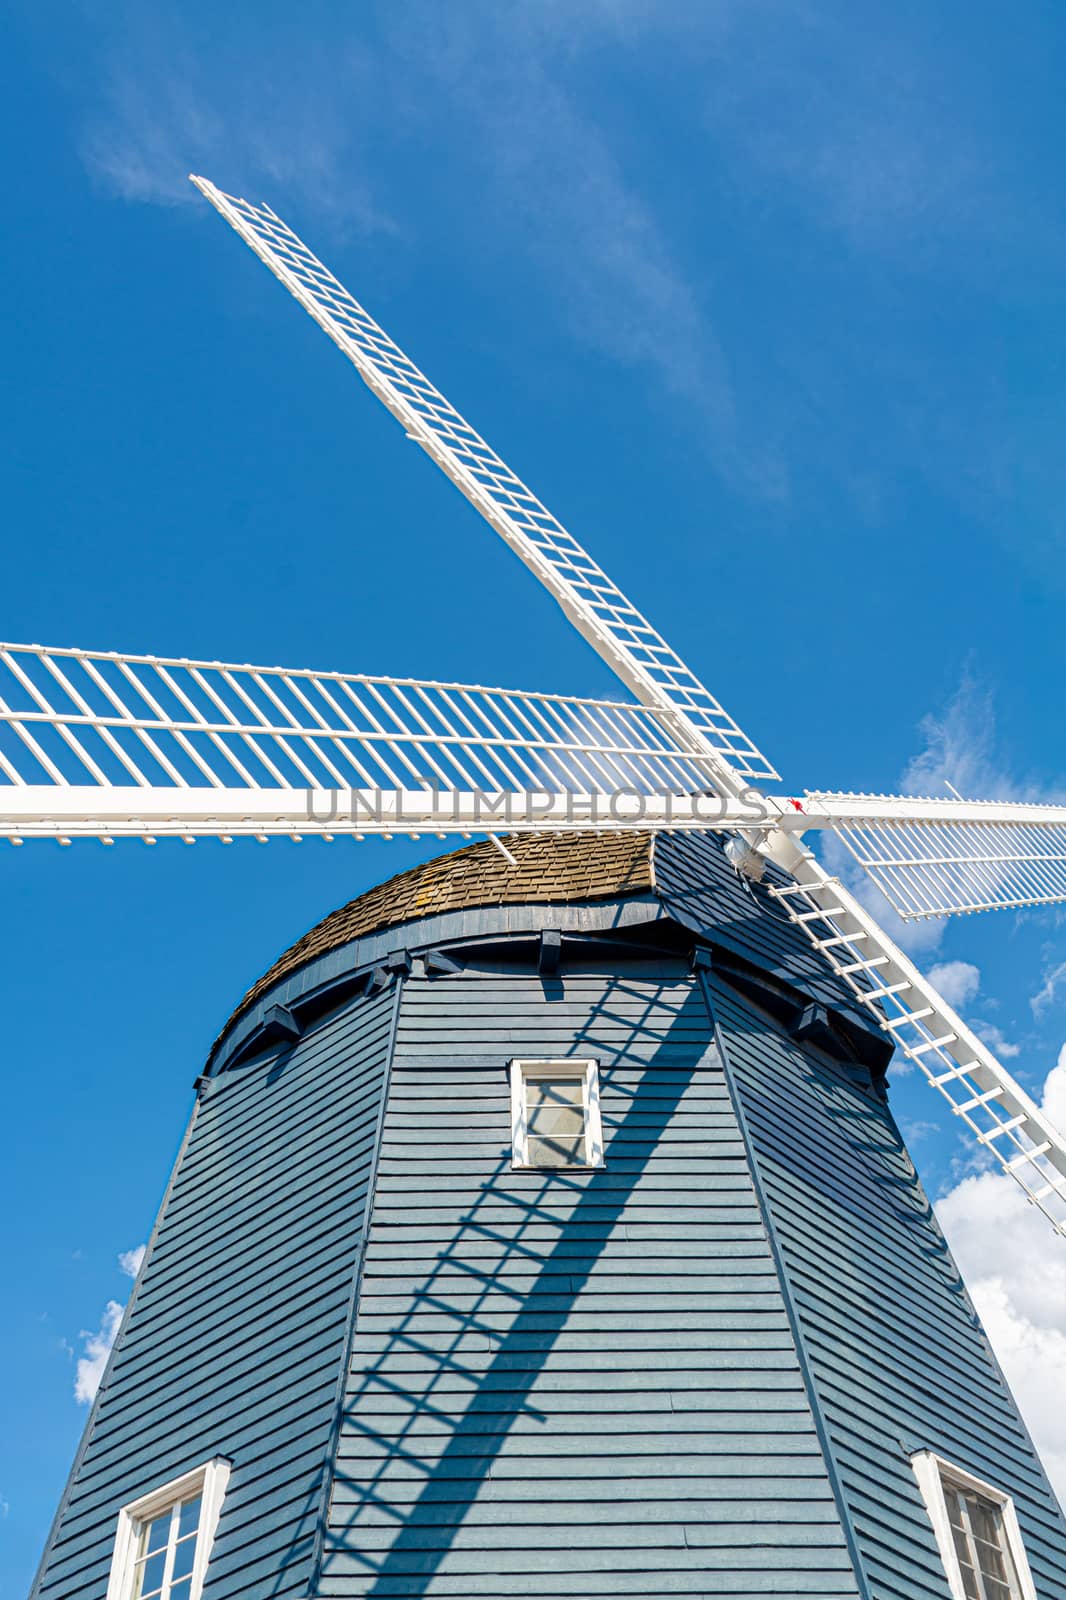 Vintage wind mill decorated with lights on blue sky background